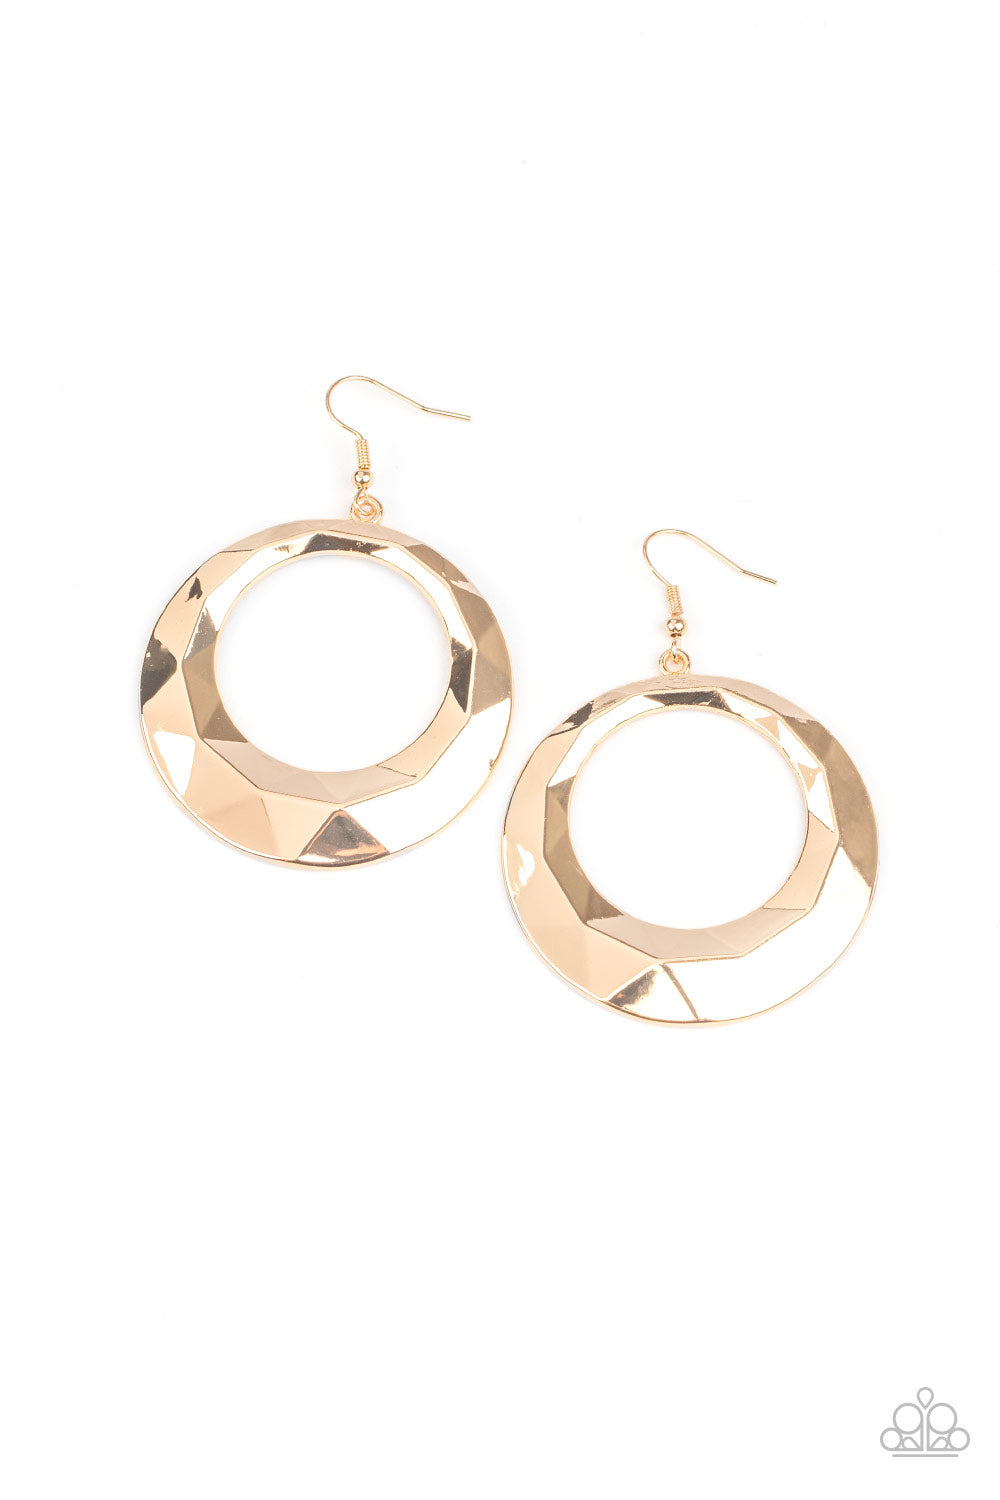 Fiercely Faceted - Gold Earrings- Paparazzi Accessories - Paparazzi Accessories 